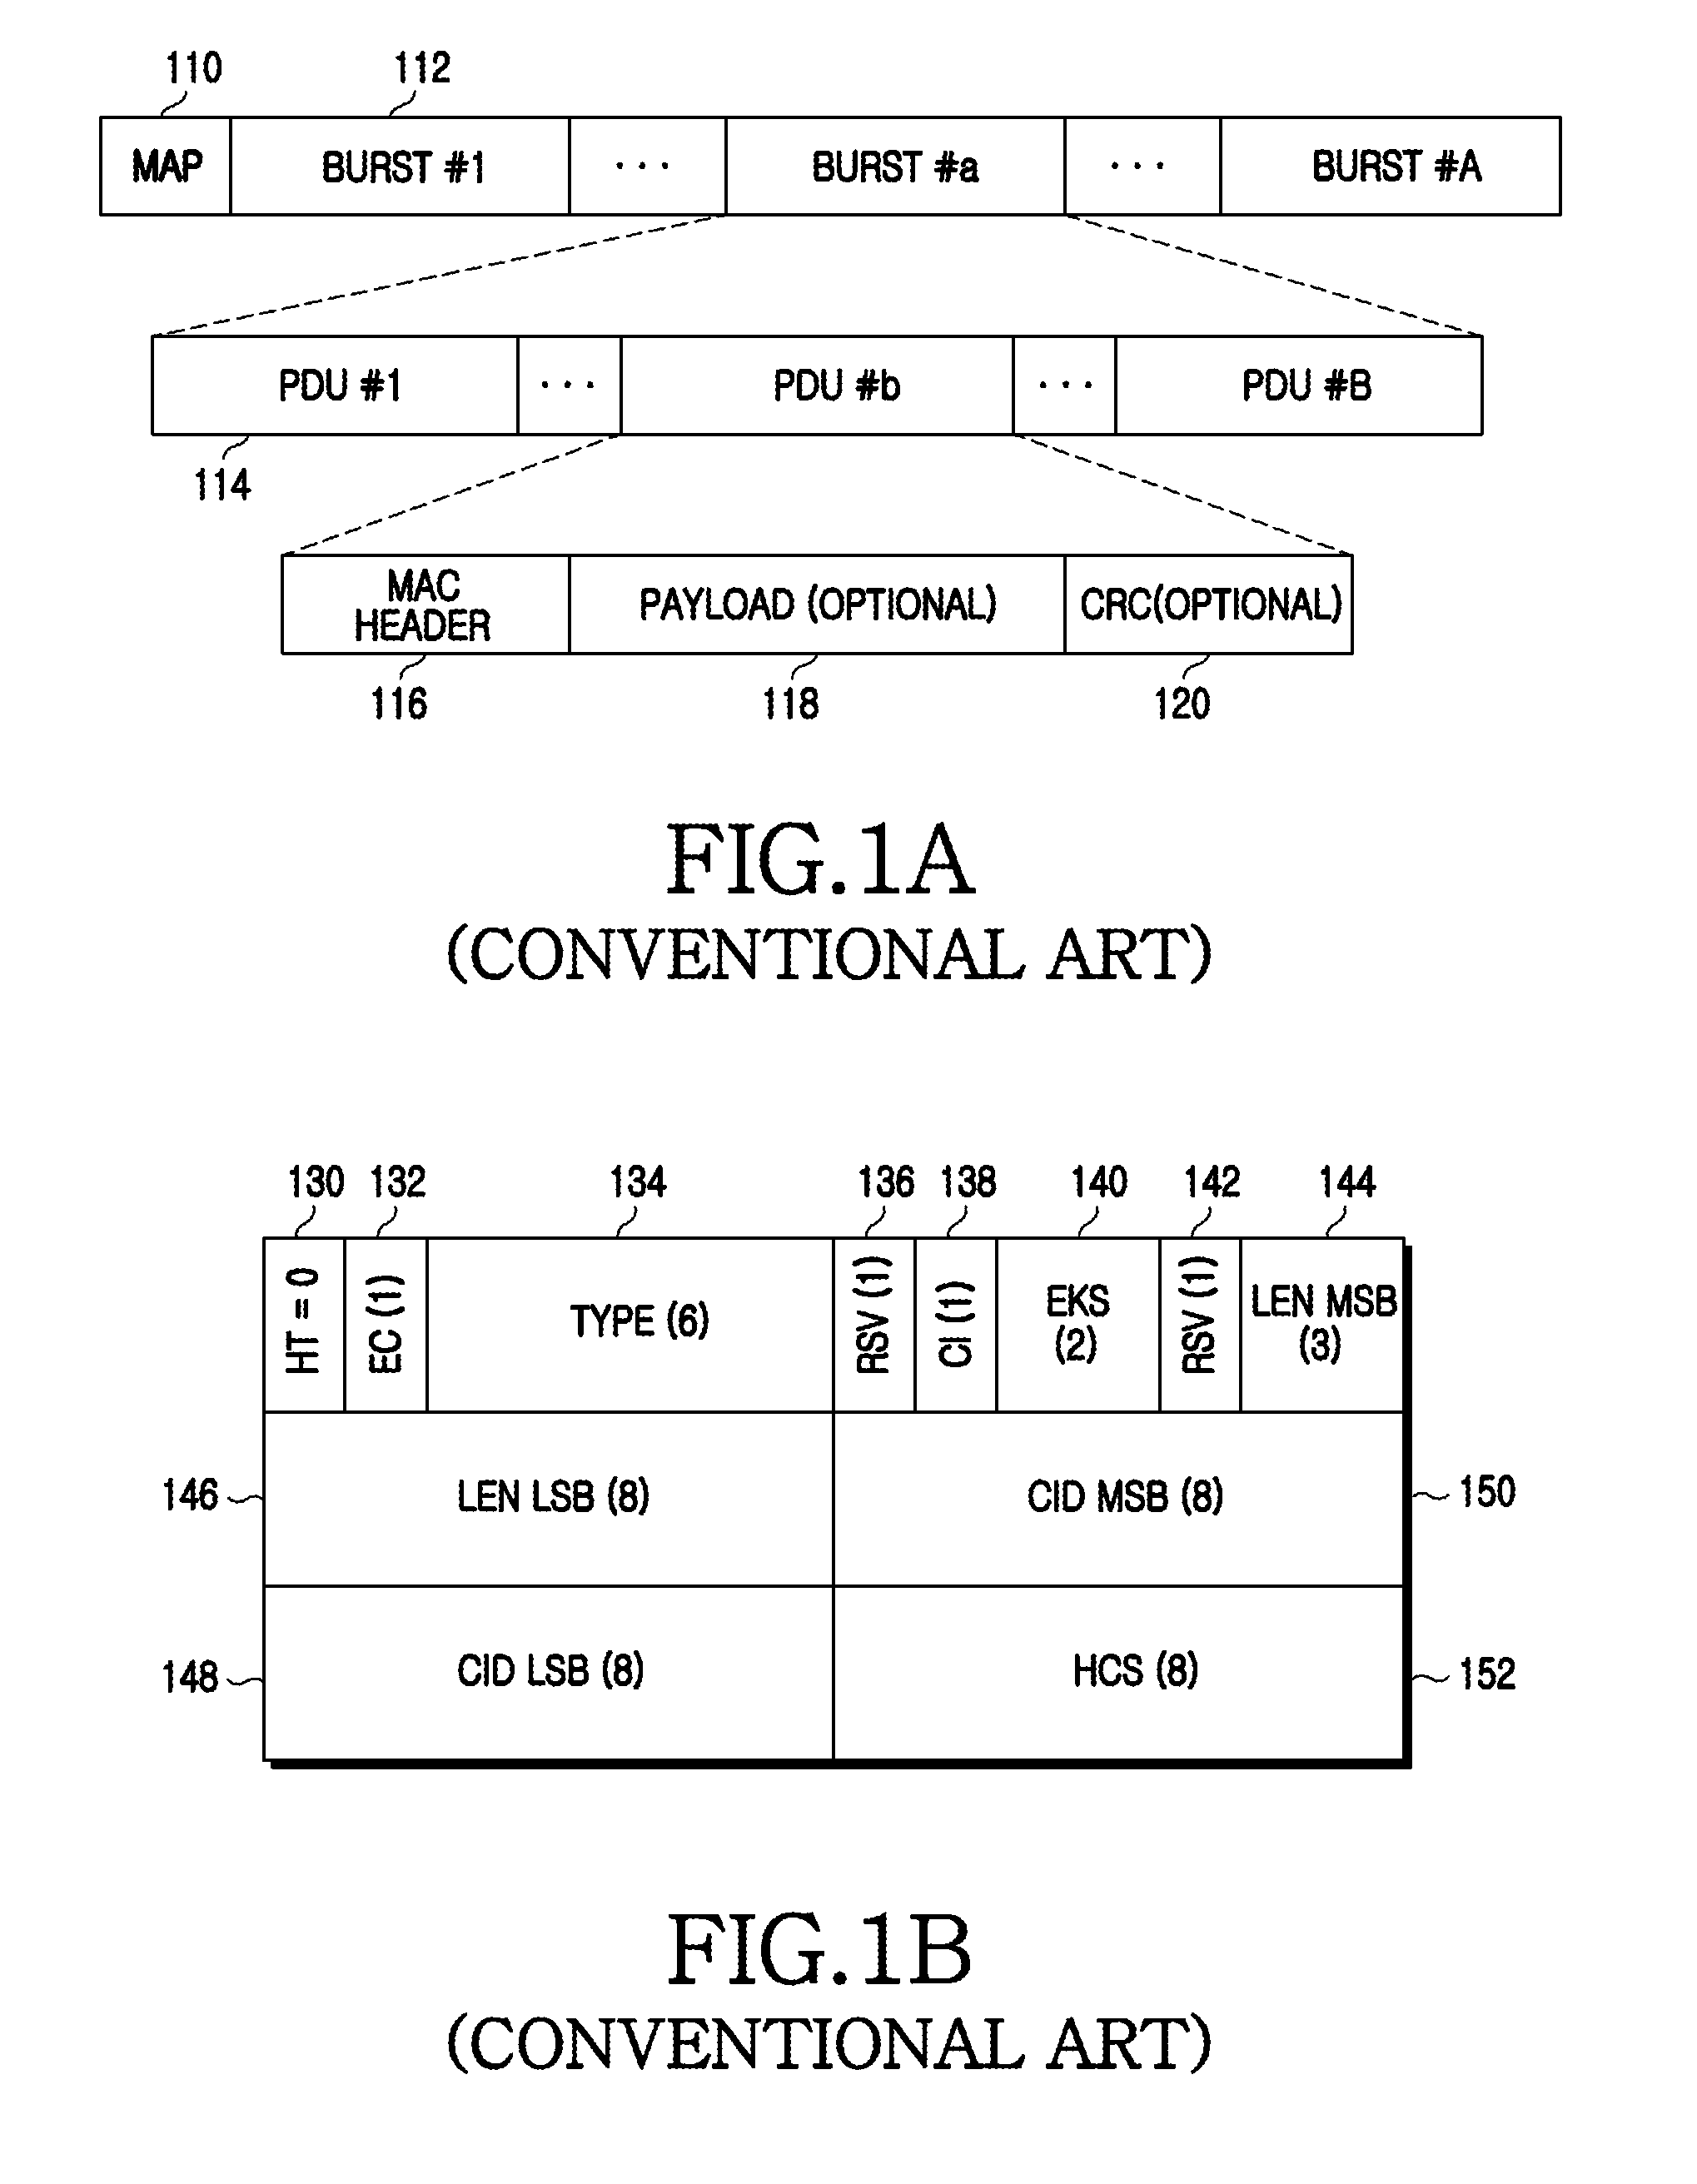 Apparatus and method for controlling iterative decoding in a mobile communication system